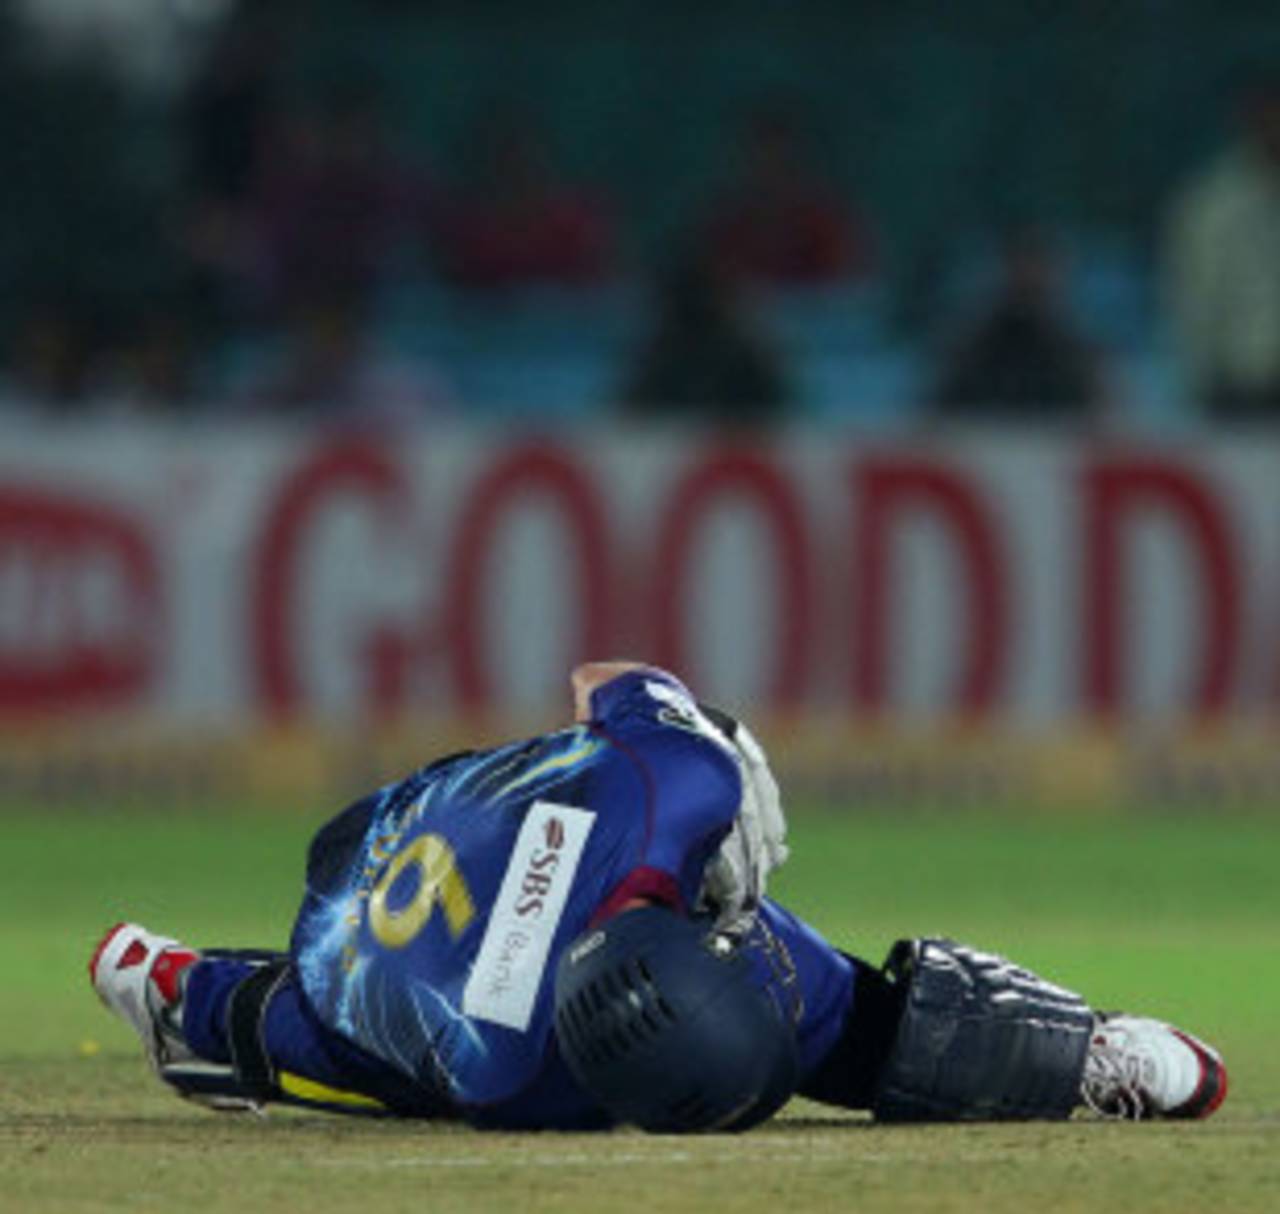 Ian Butler is on the ground after being struck by a full toss, Lions v Otago, Group A, Champions League 2013, Jaipur, September 29, 2013